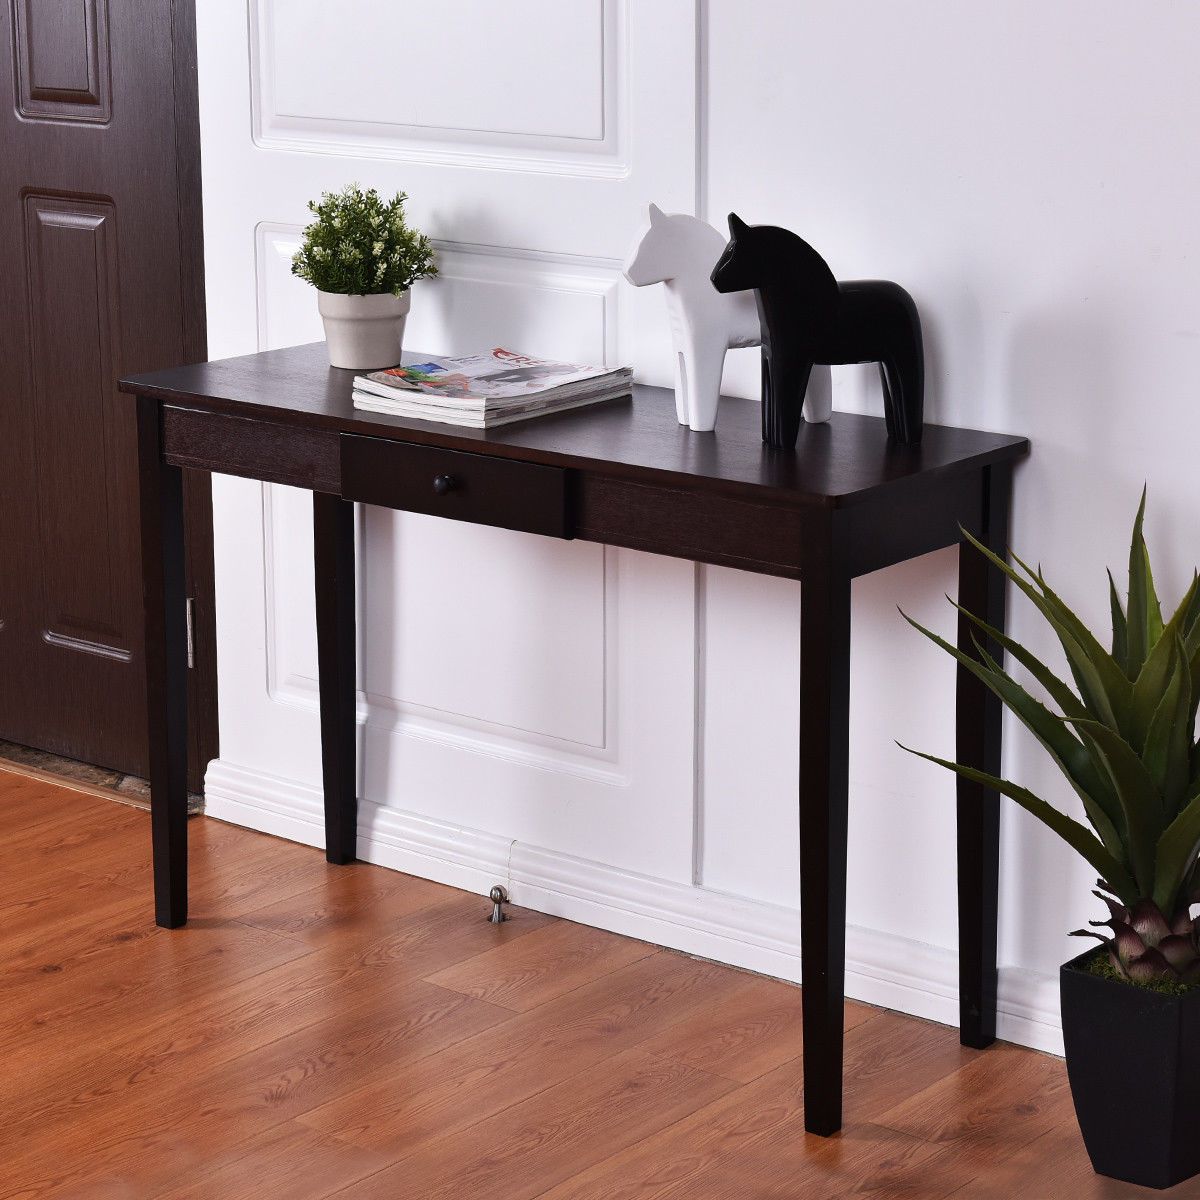 Modern Entryway Table Ideas: 12 Fresh And Inviting Looks For Your Entryway Table